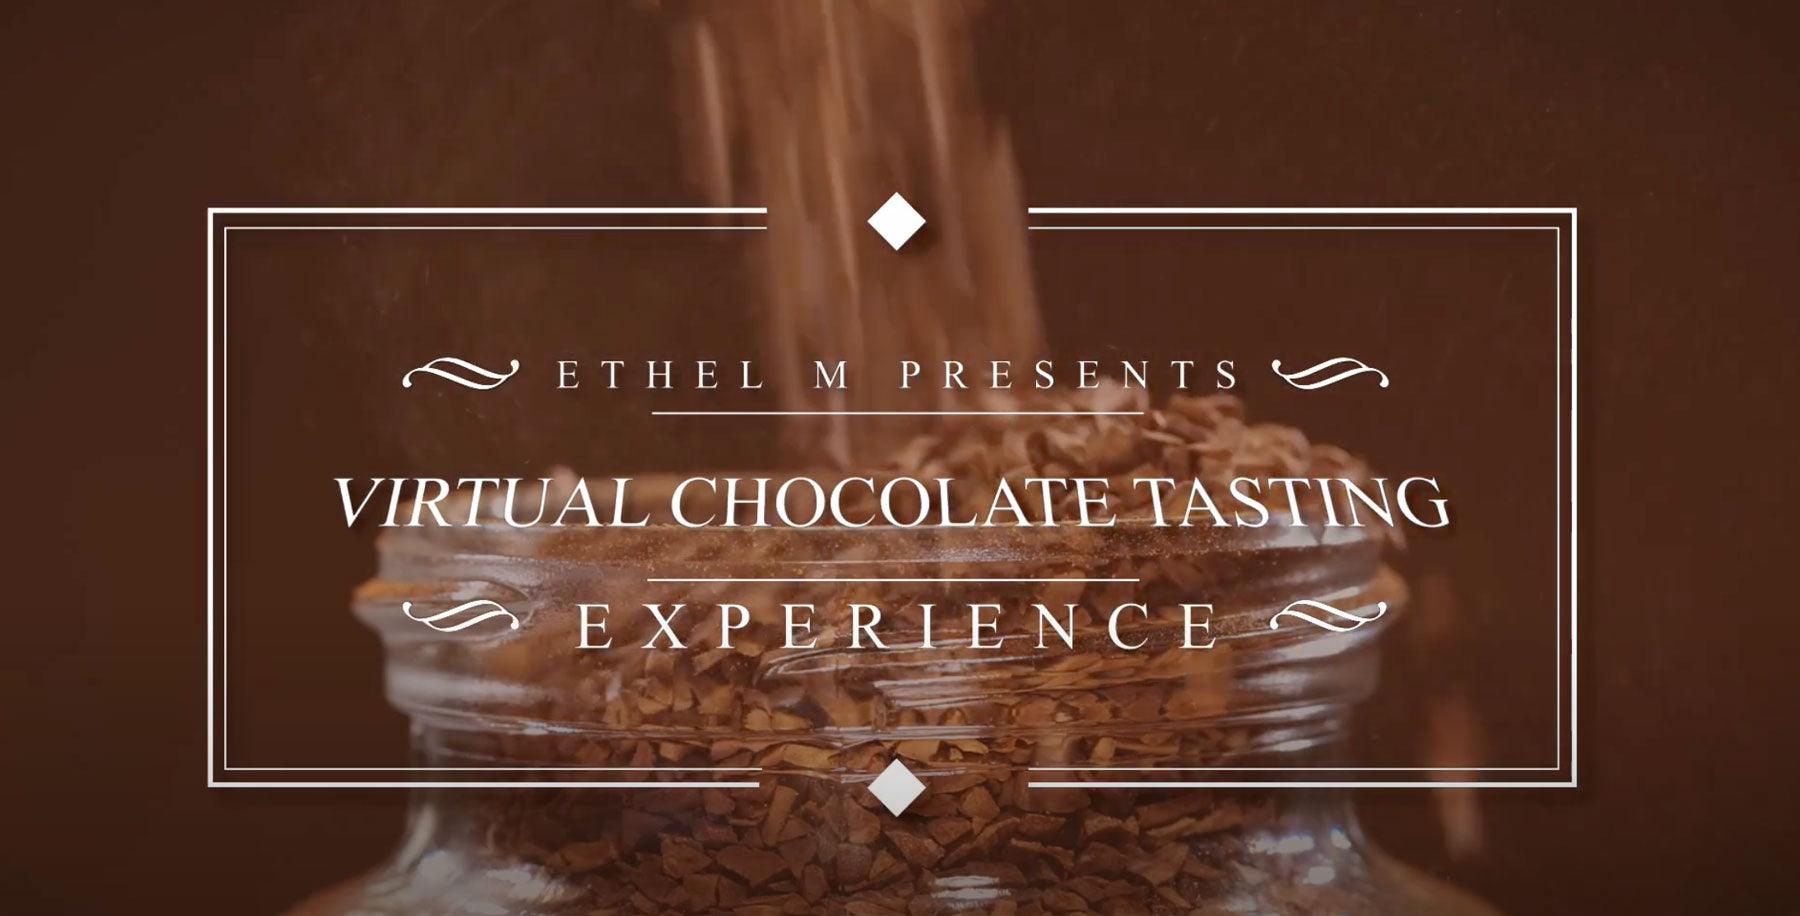 Load video: Ethel M Chocolates Private Online Tasting Highlight Video. Showcases the Tasting Experience and some of the key points in the event.